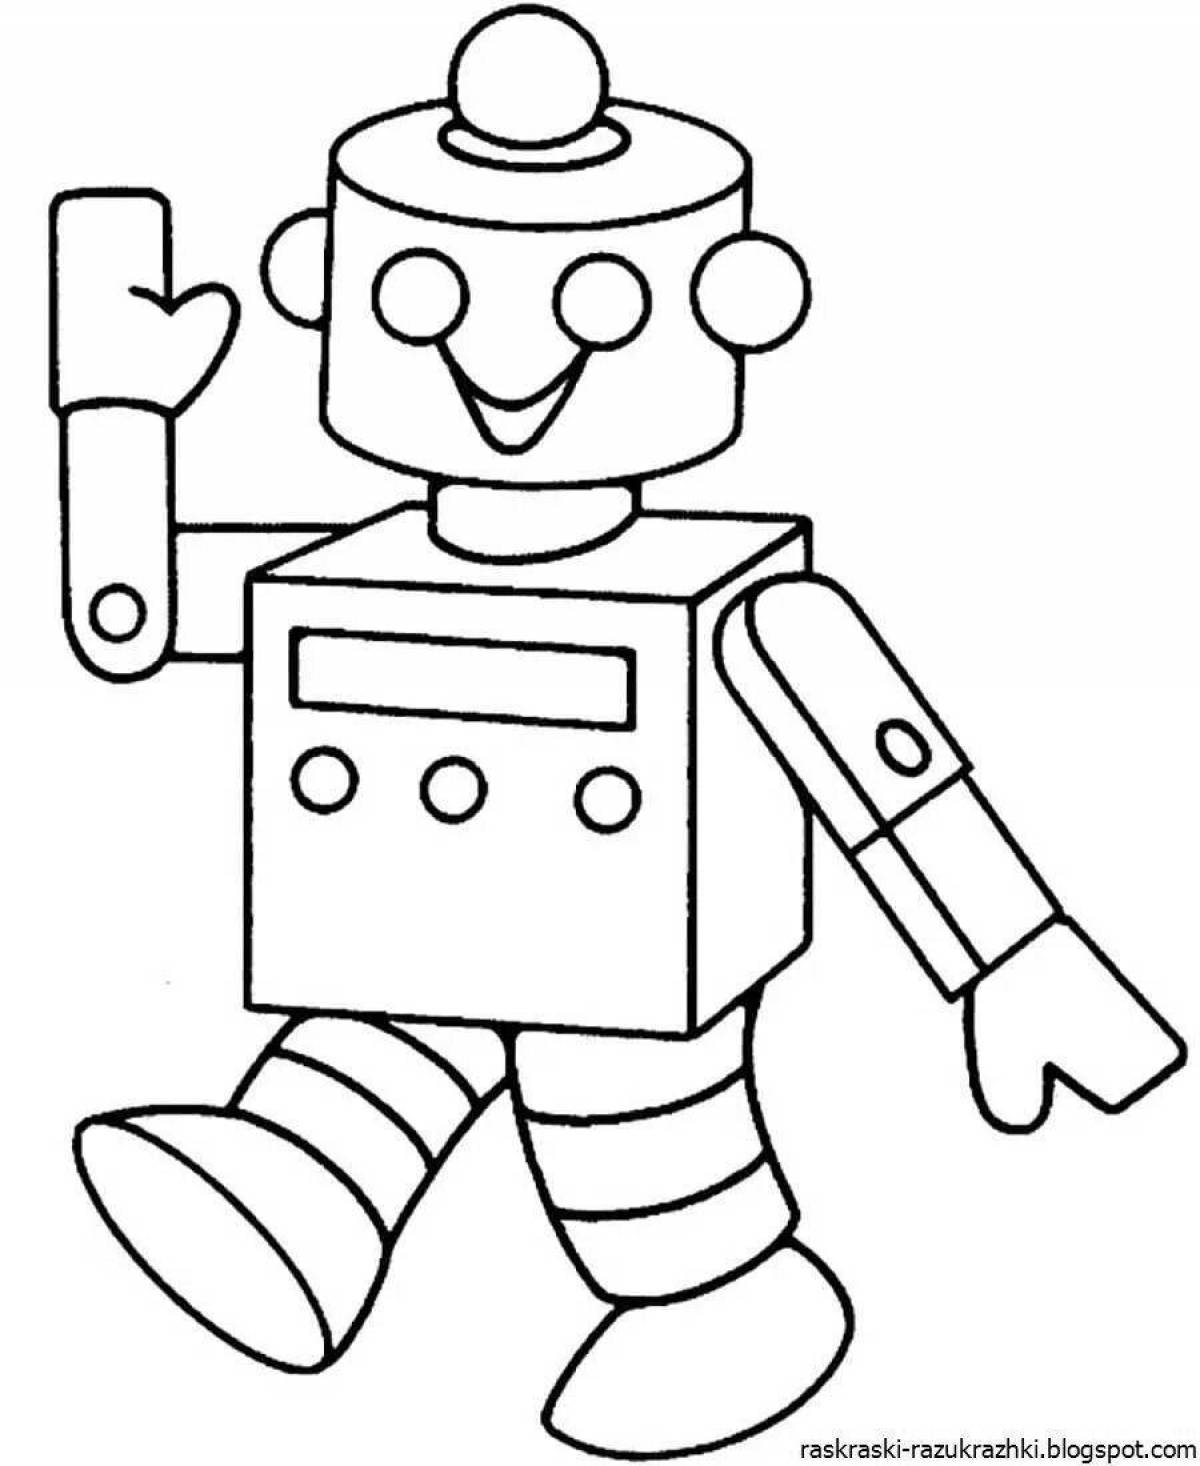 Colorful coloring of robots for children